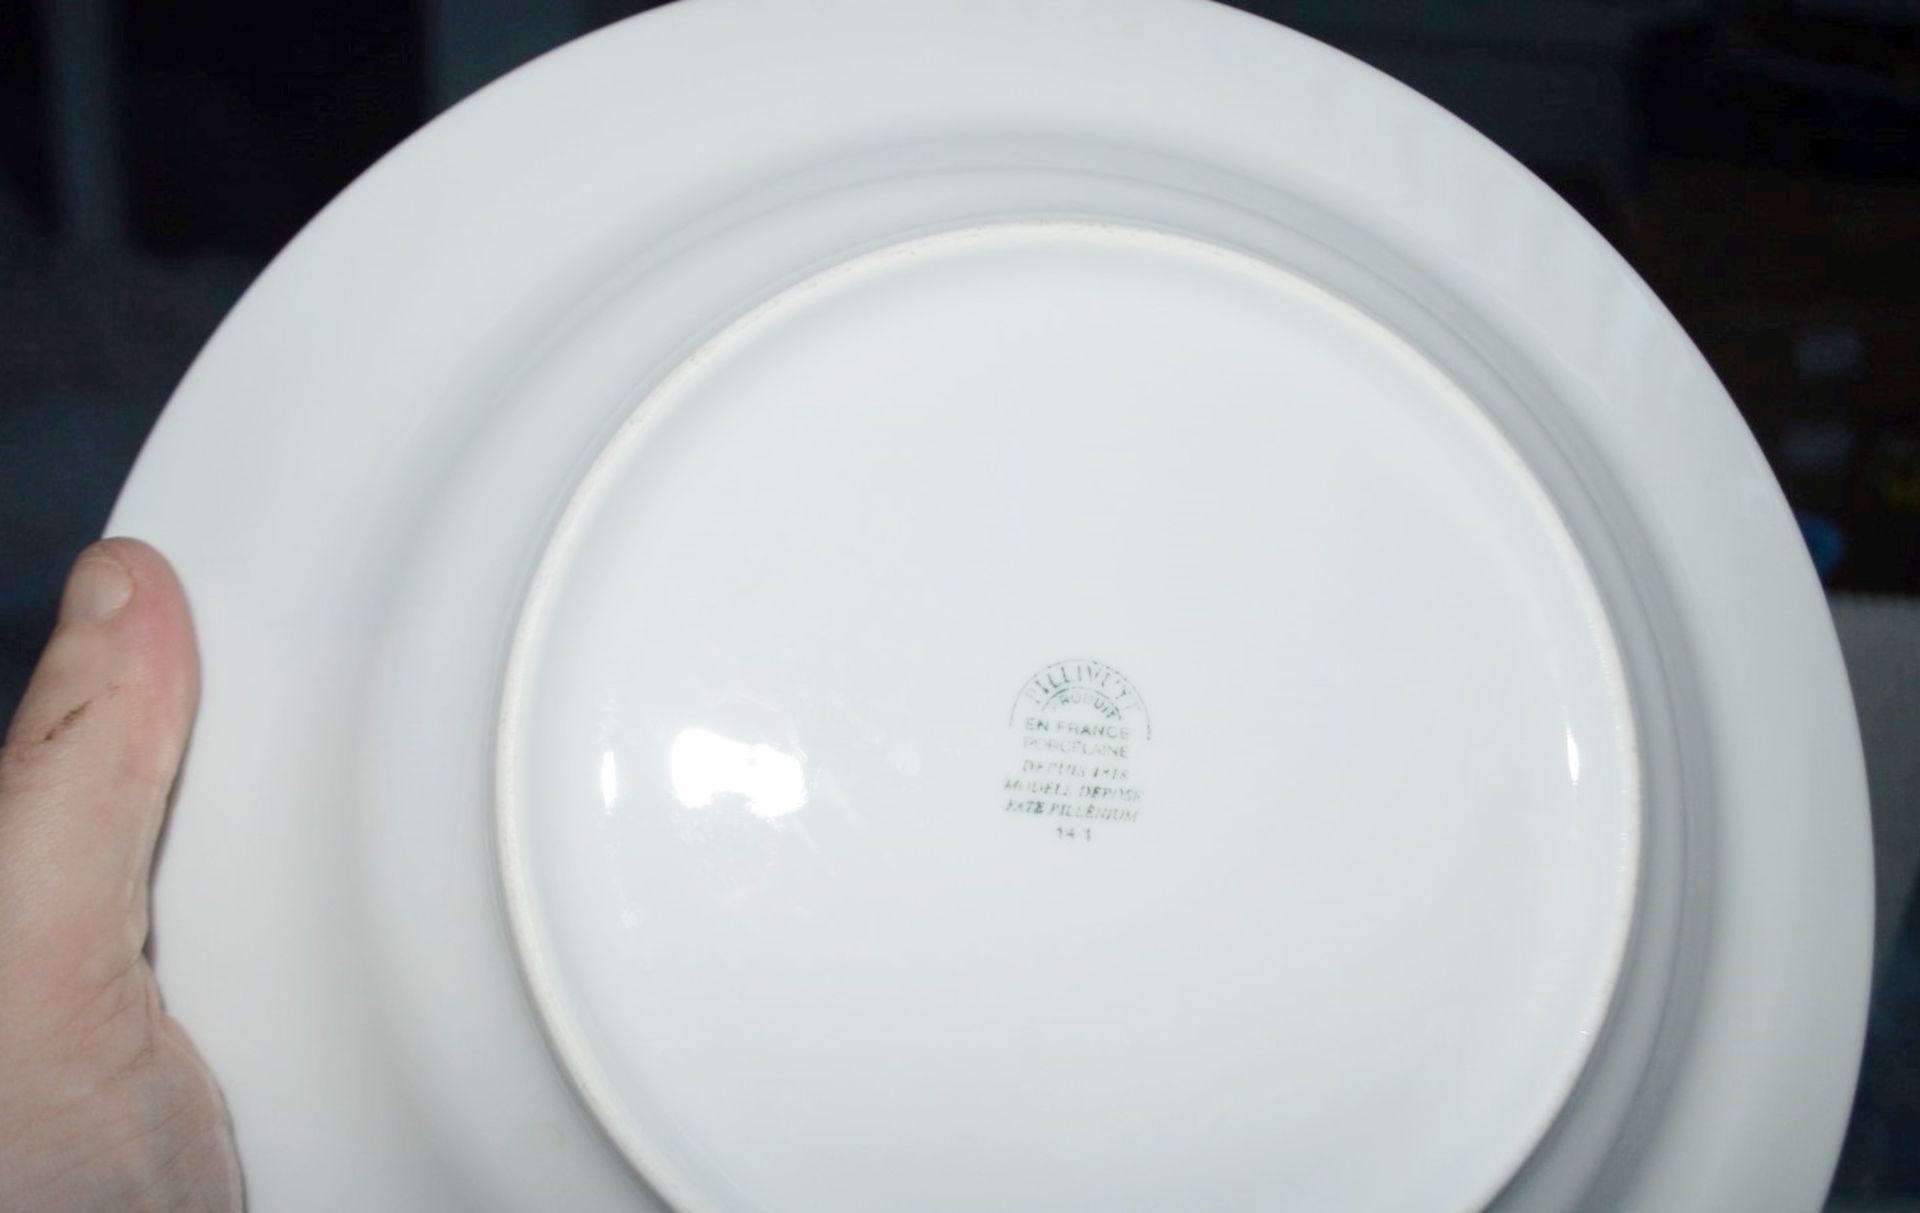 12 x PILLIVUYT Porcelain 27cm Pasta / Soup Plates In White Featuring 'Famous Branding' In Gold - - Image 3 of 5